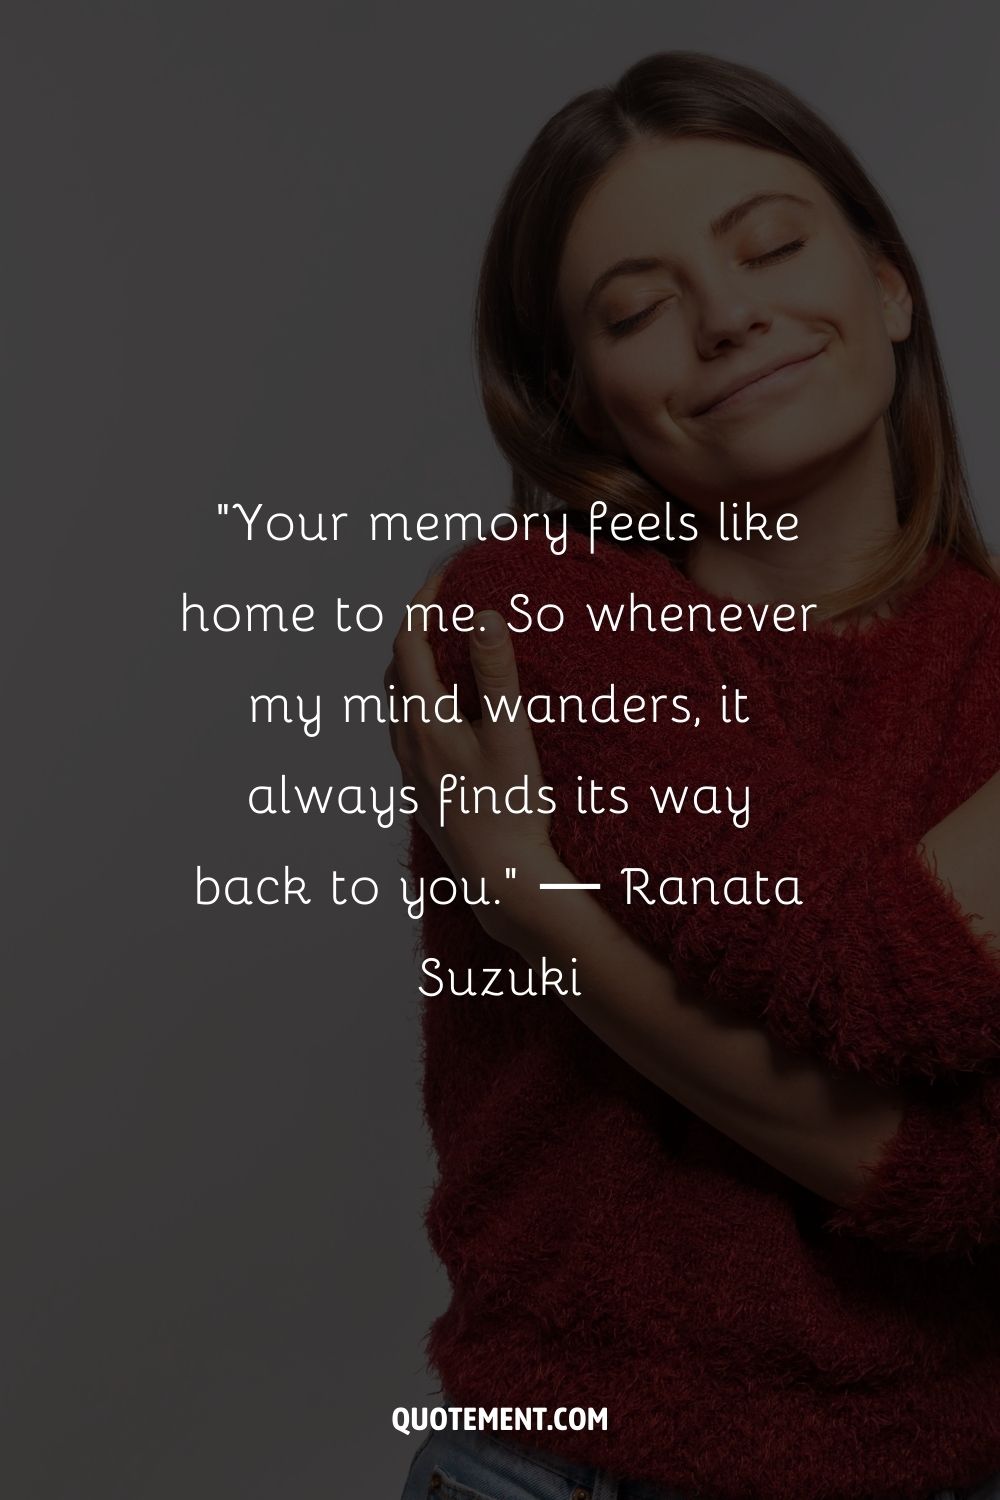 Your memory feels like home to me. So whenever my mind wanders, it always finds its way back to you